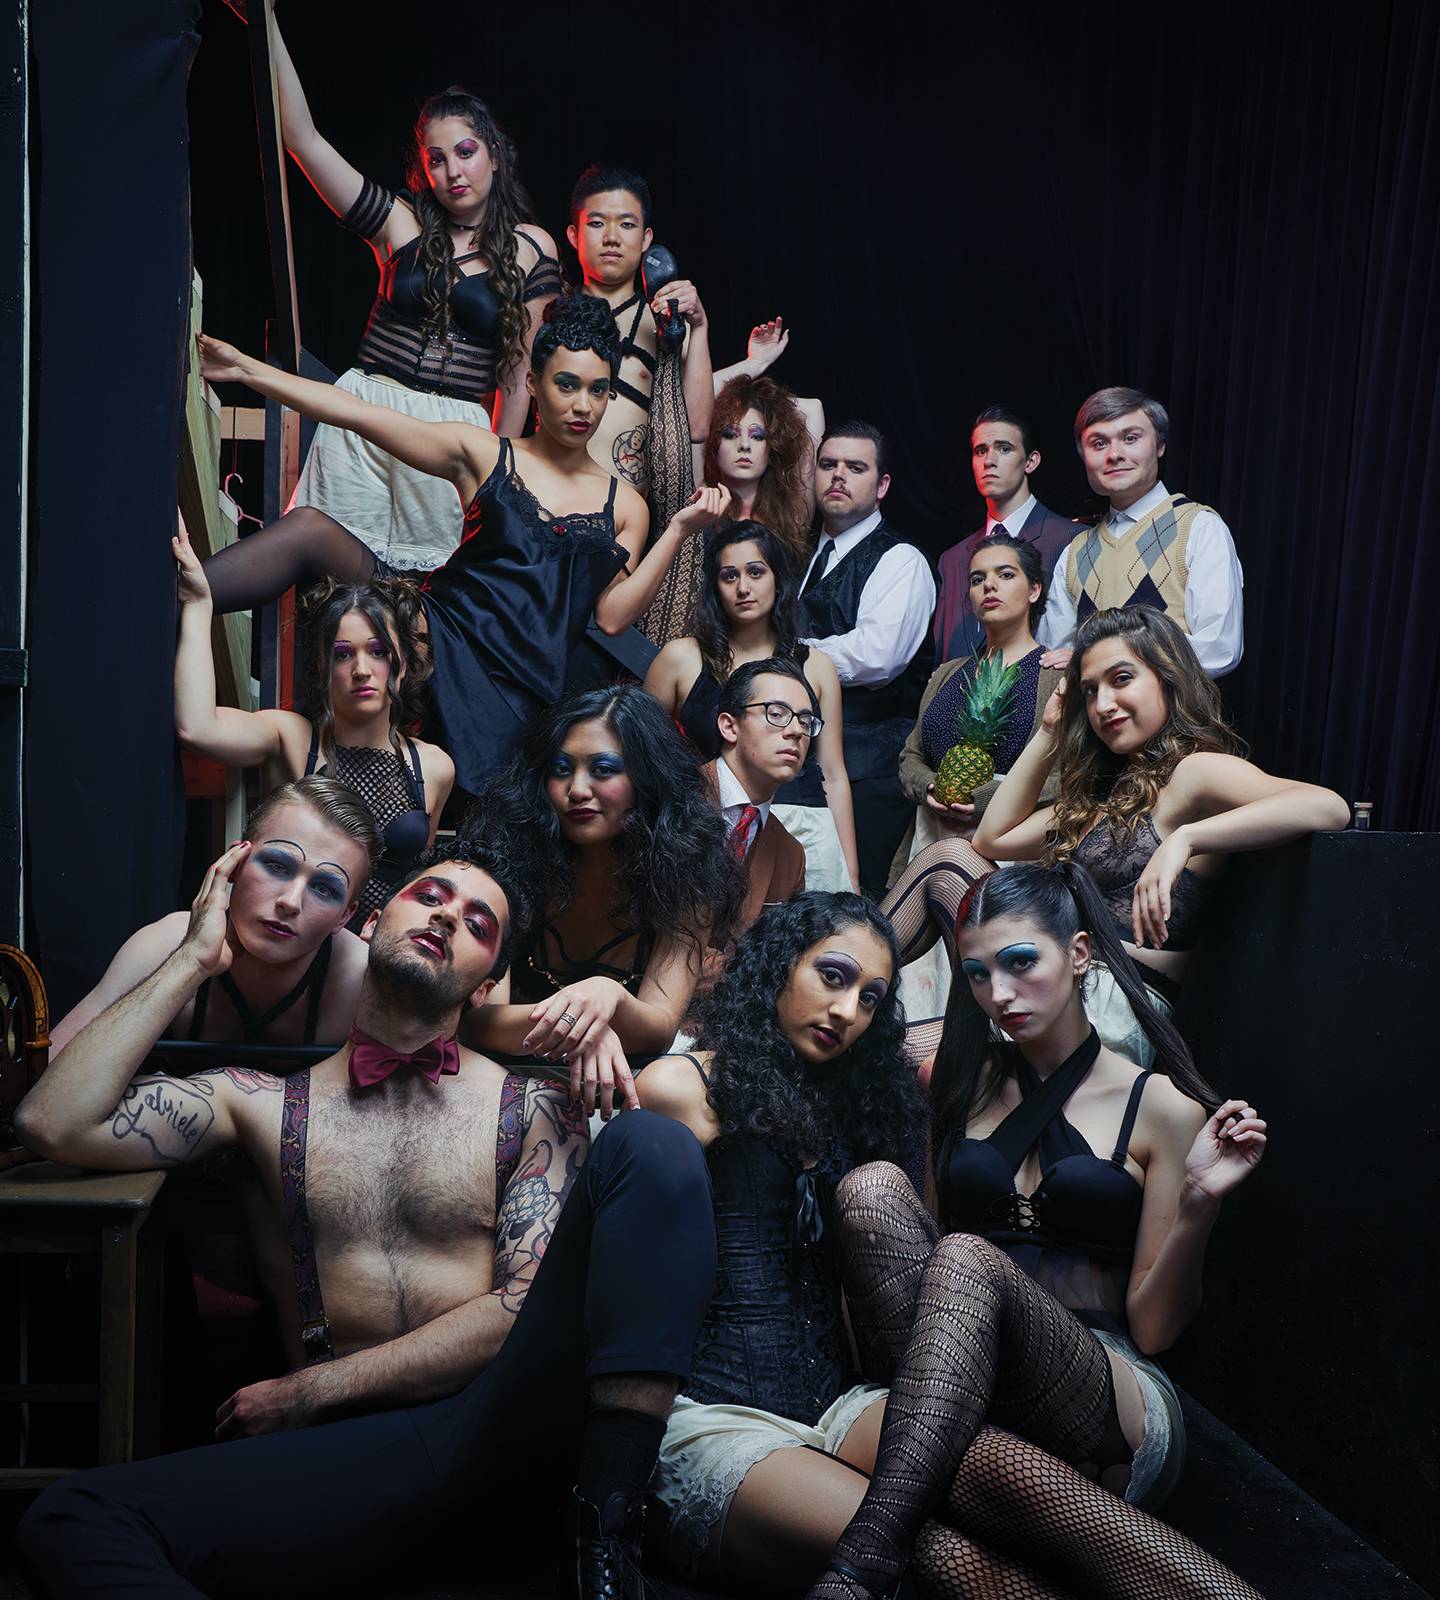 Group photo of actors in costume for Cabaret